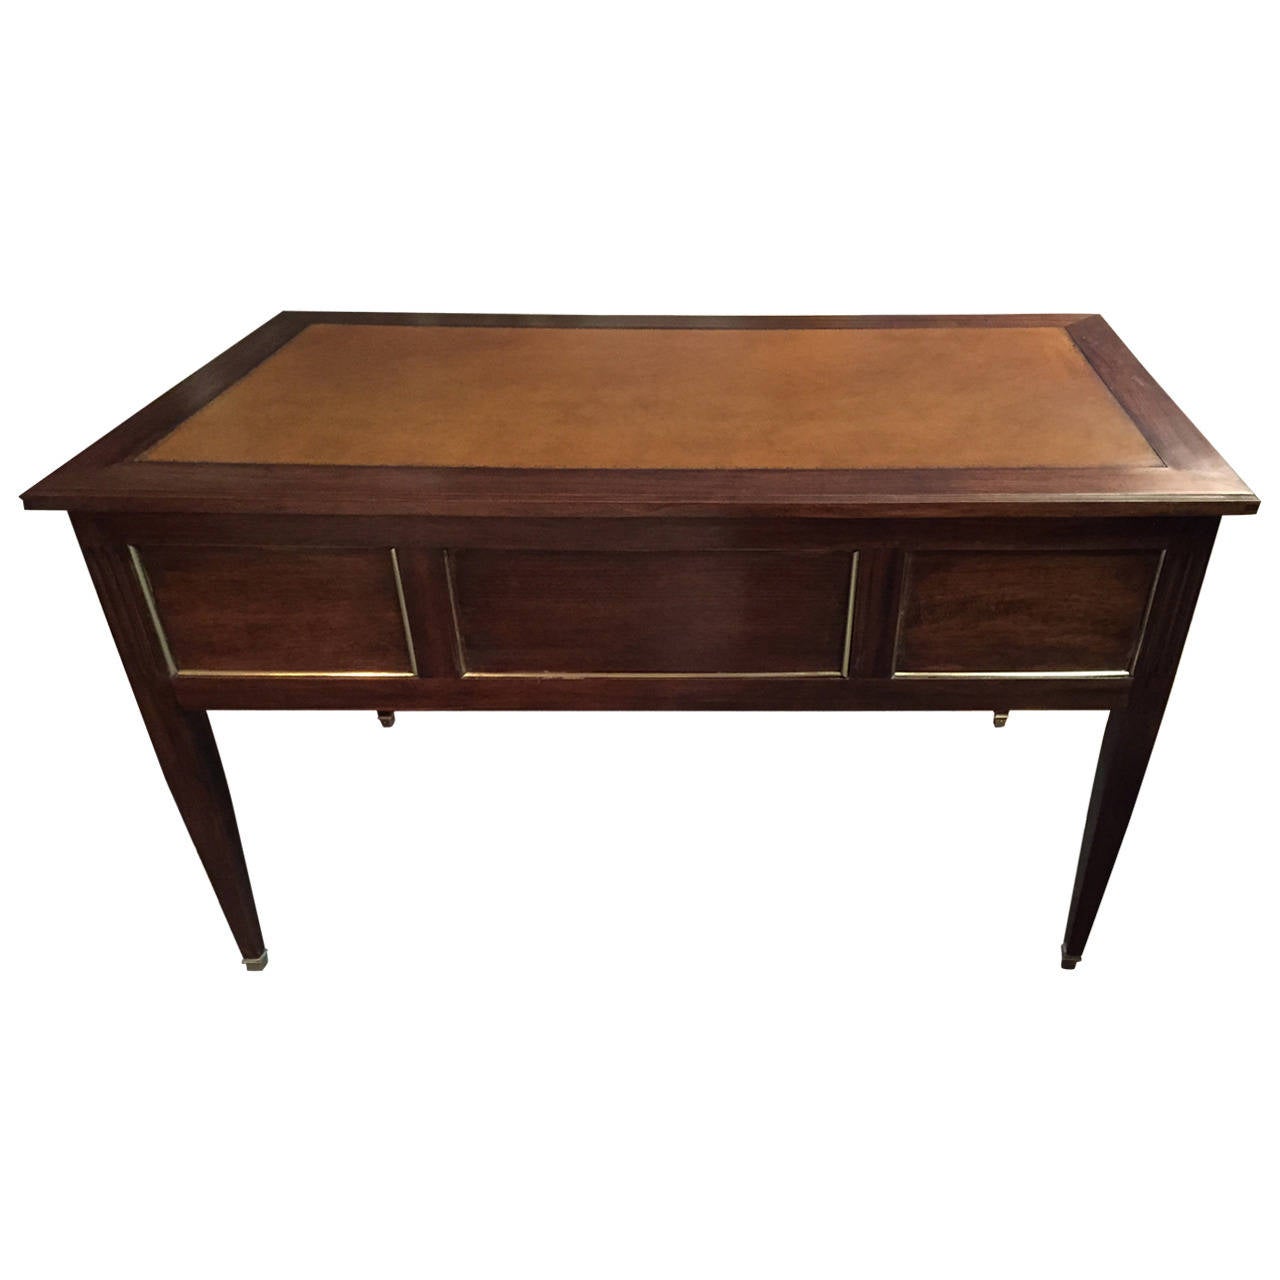 Beautiful French Leather Writing Desk.  Brown leather top with decorative border and glass surface to protect and preserve the leather.  Four drawer. Right side is one drawer but appears as two.  Very useful.  Also, has hidden extension surface that